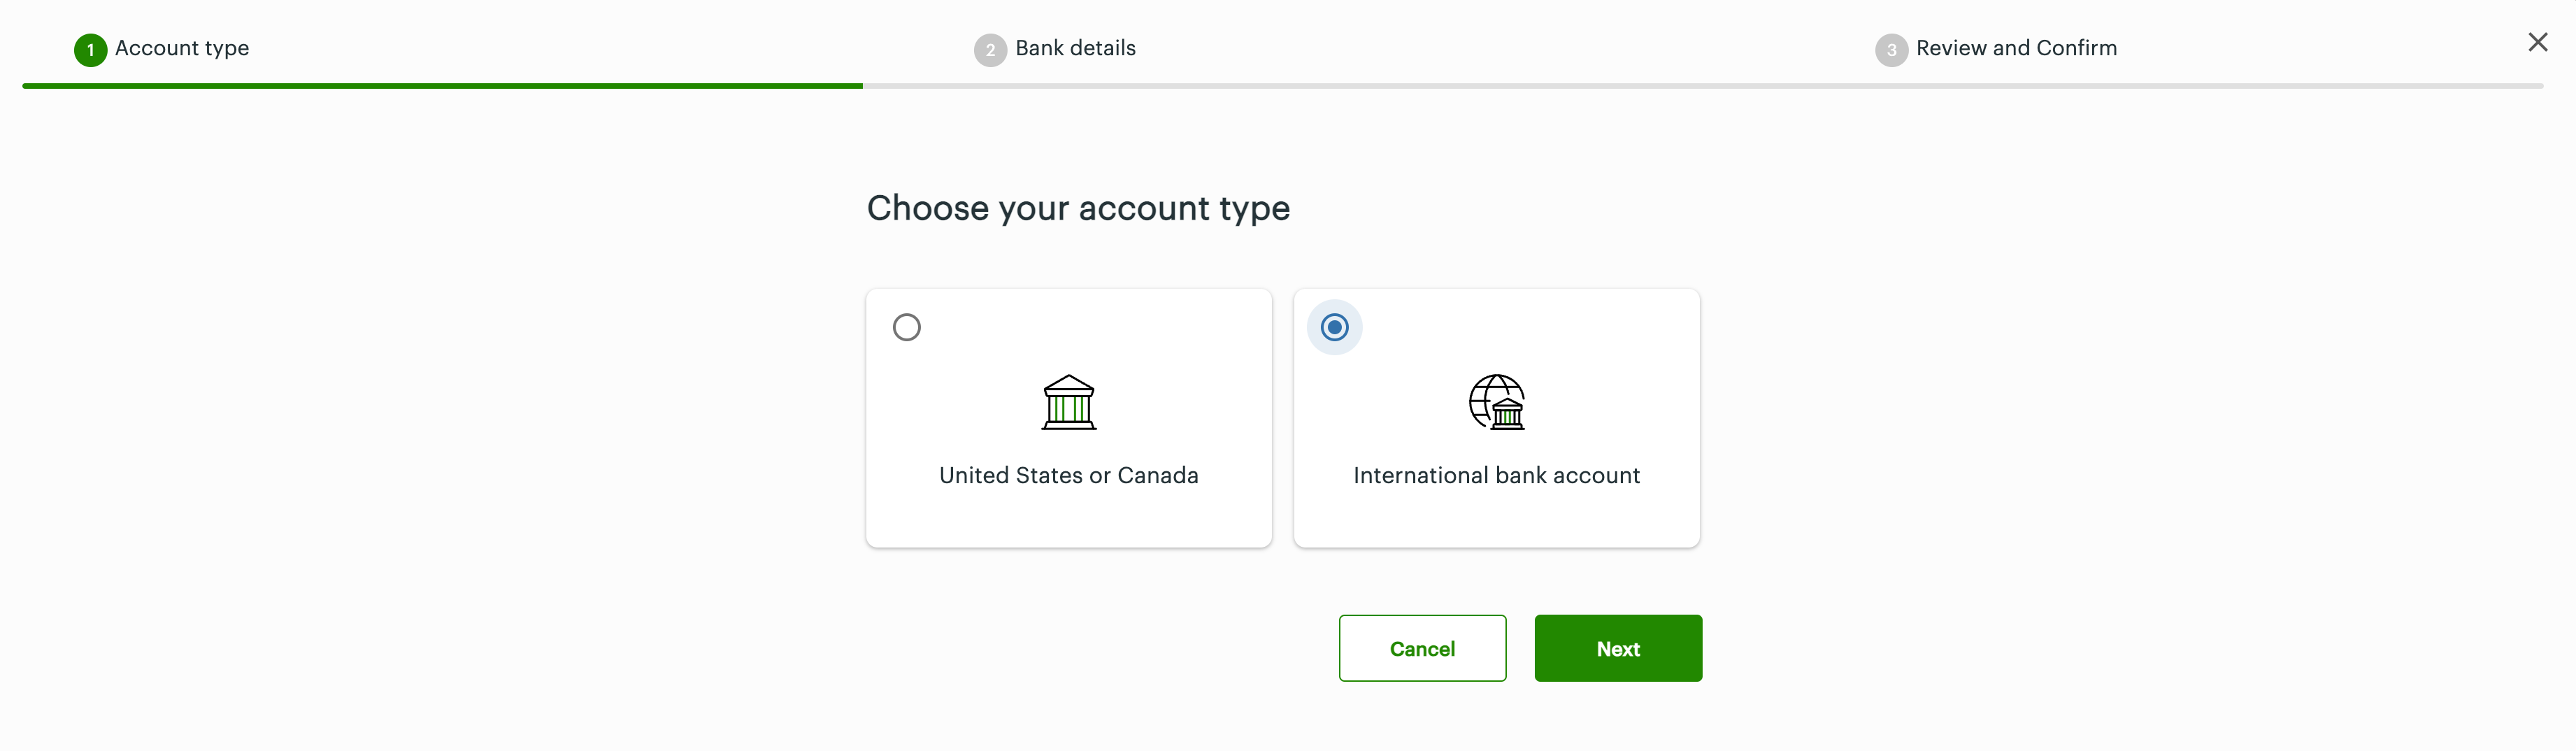 Choose your account type: International